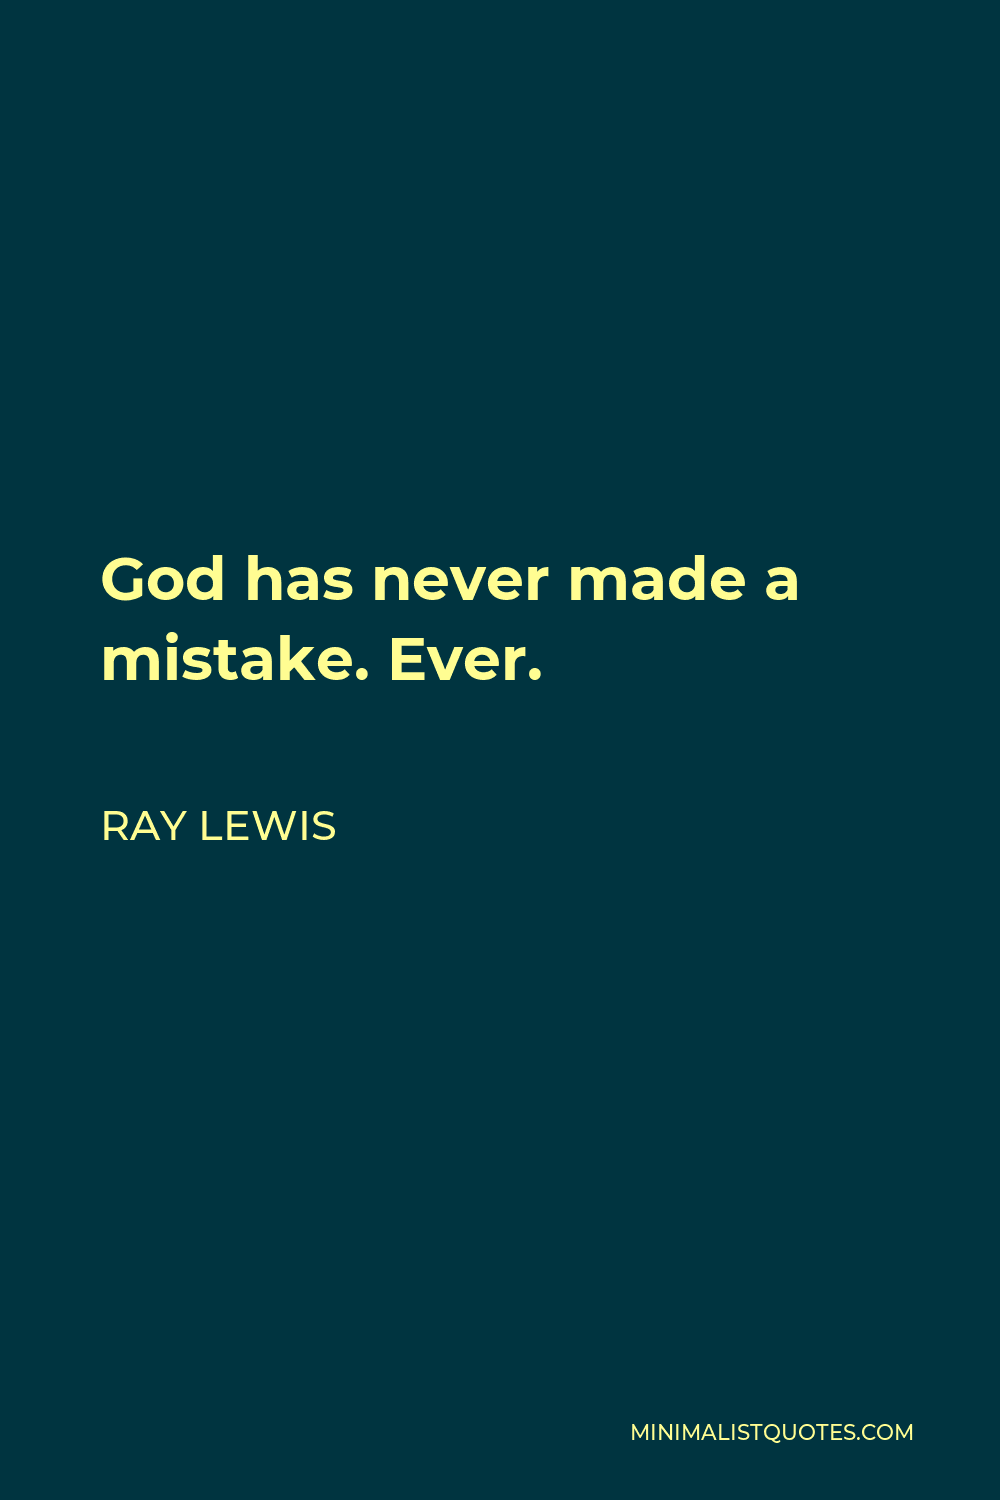 Ray Lewis Quote - God has never made a mistake. Ever.